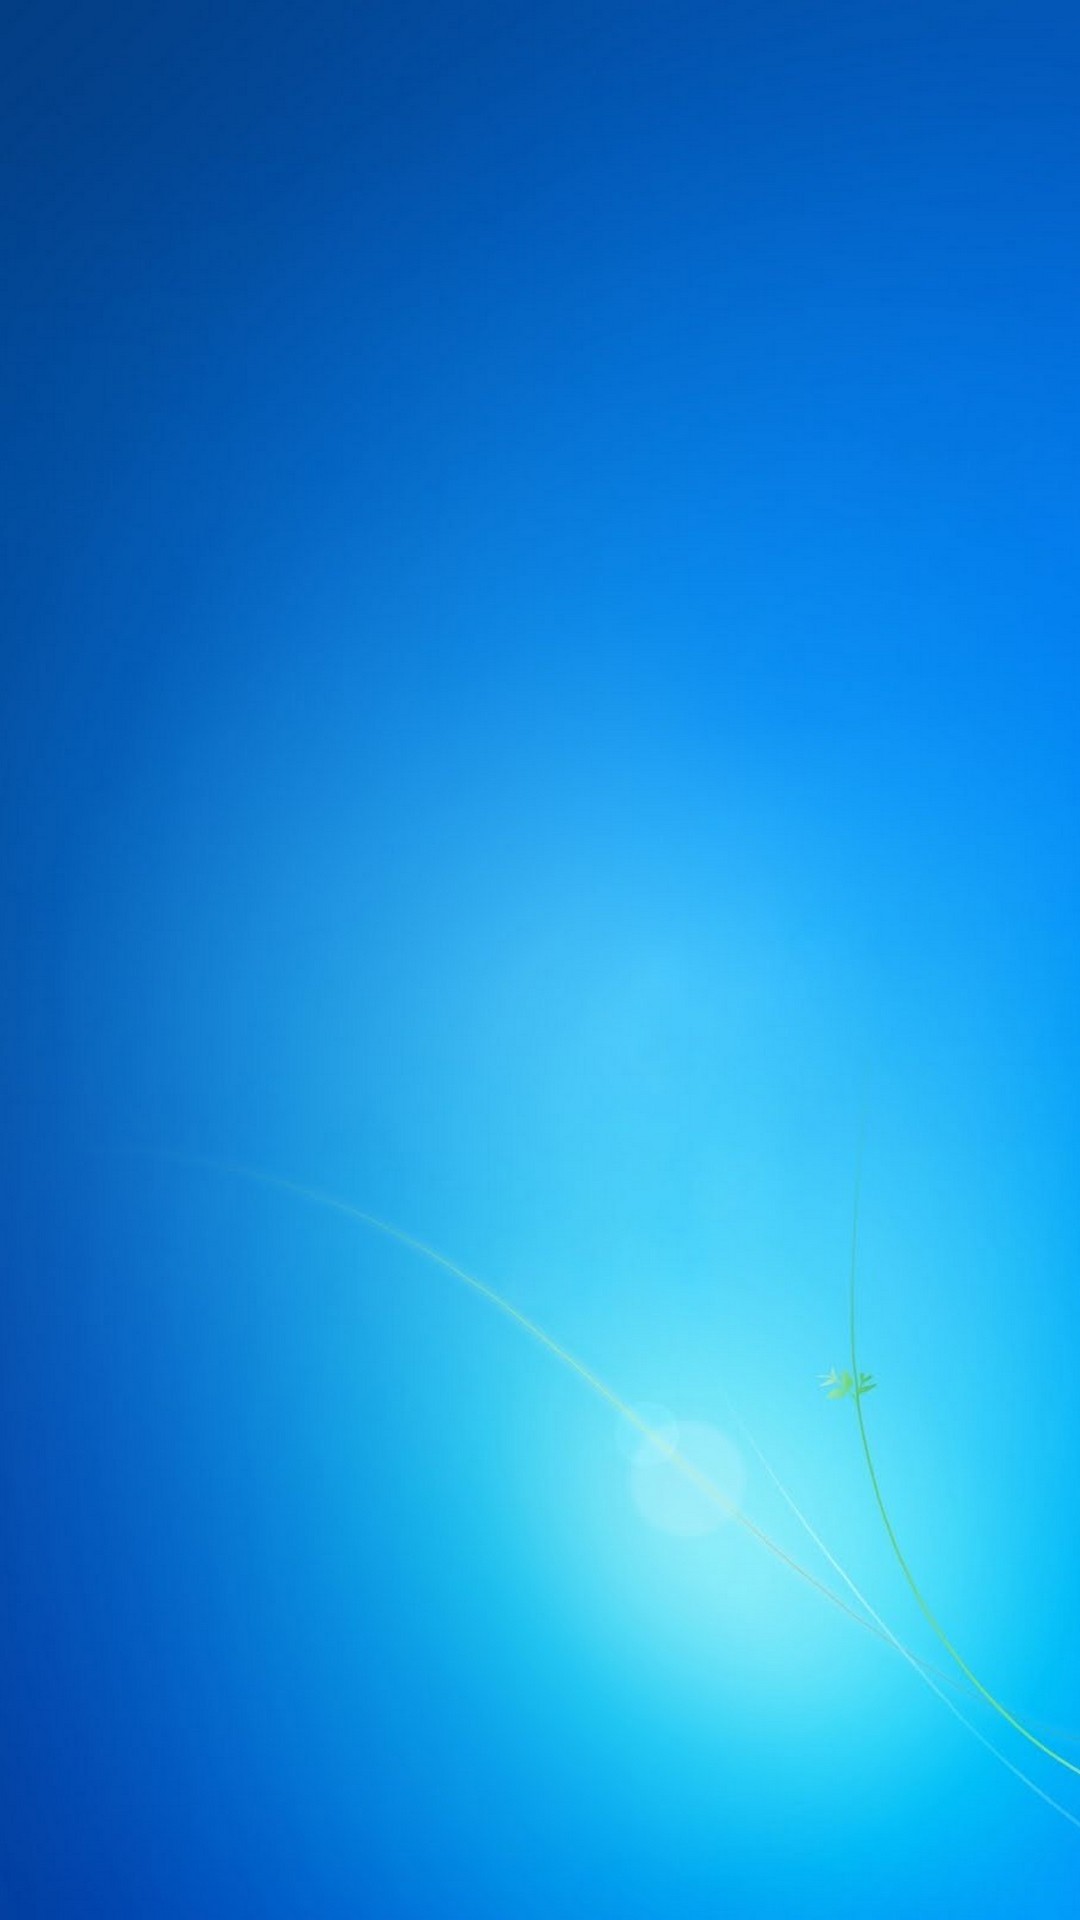 Awesome Blue iPhone Wallpaper resolution 1080x1920